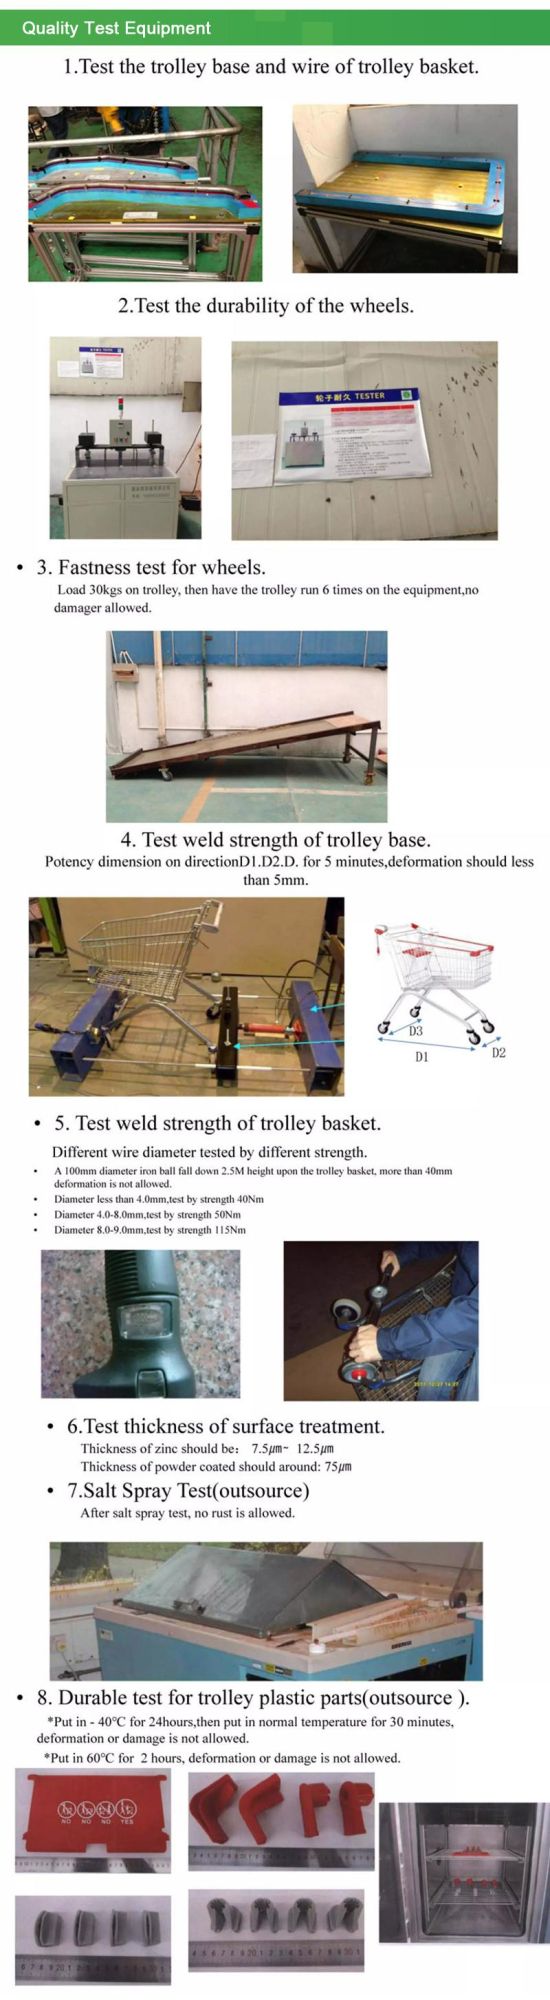 100L Size Shopping Supermarket Trolley Cart Price